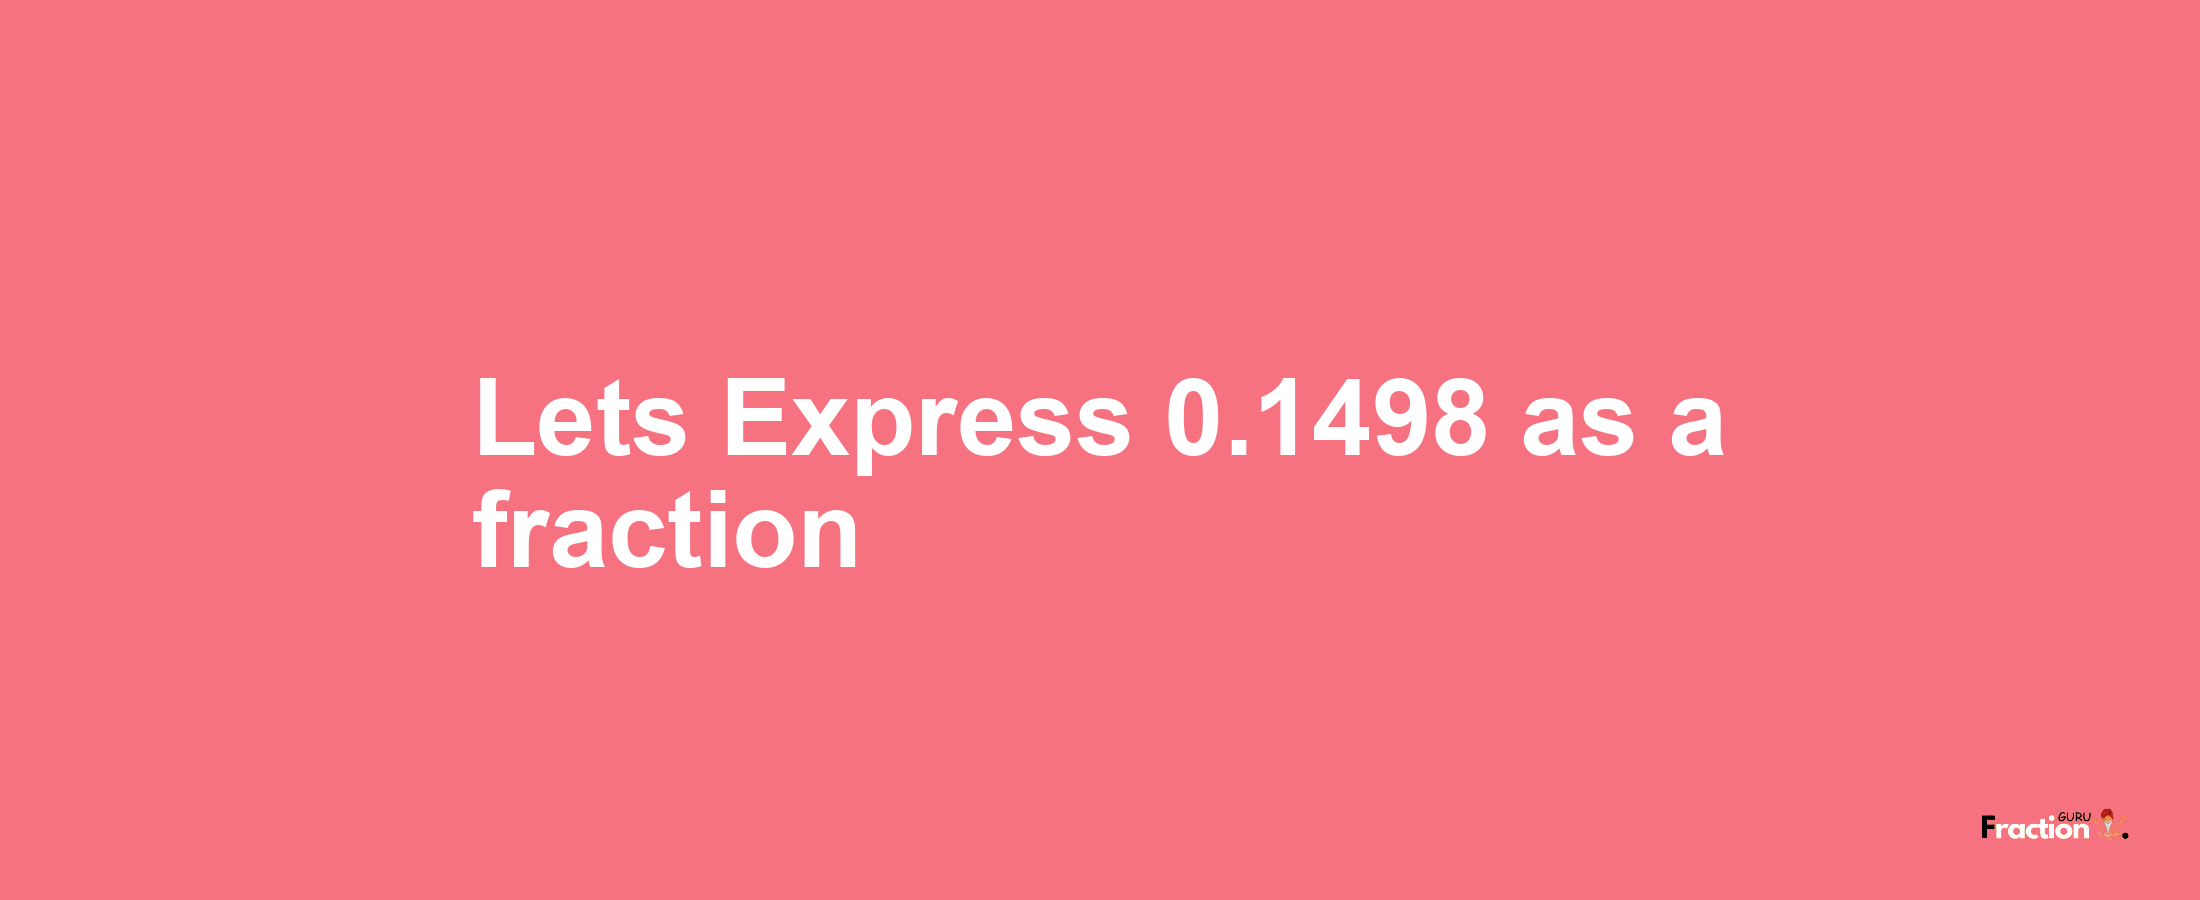 Lets Express 0.1498 as afraction